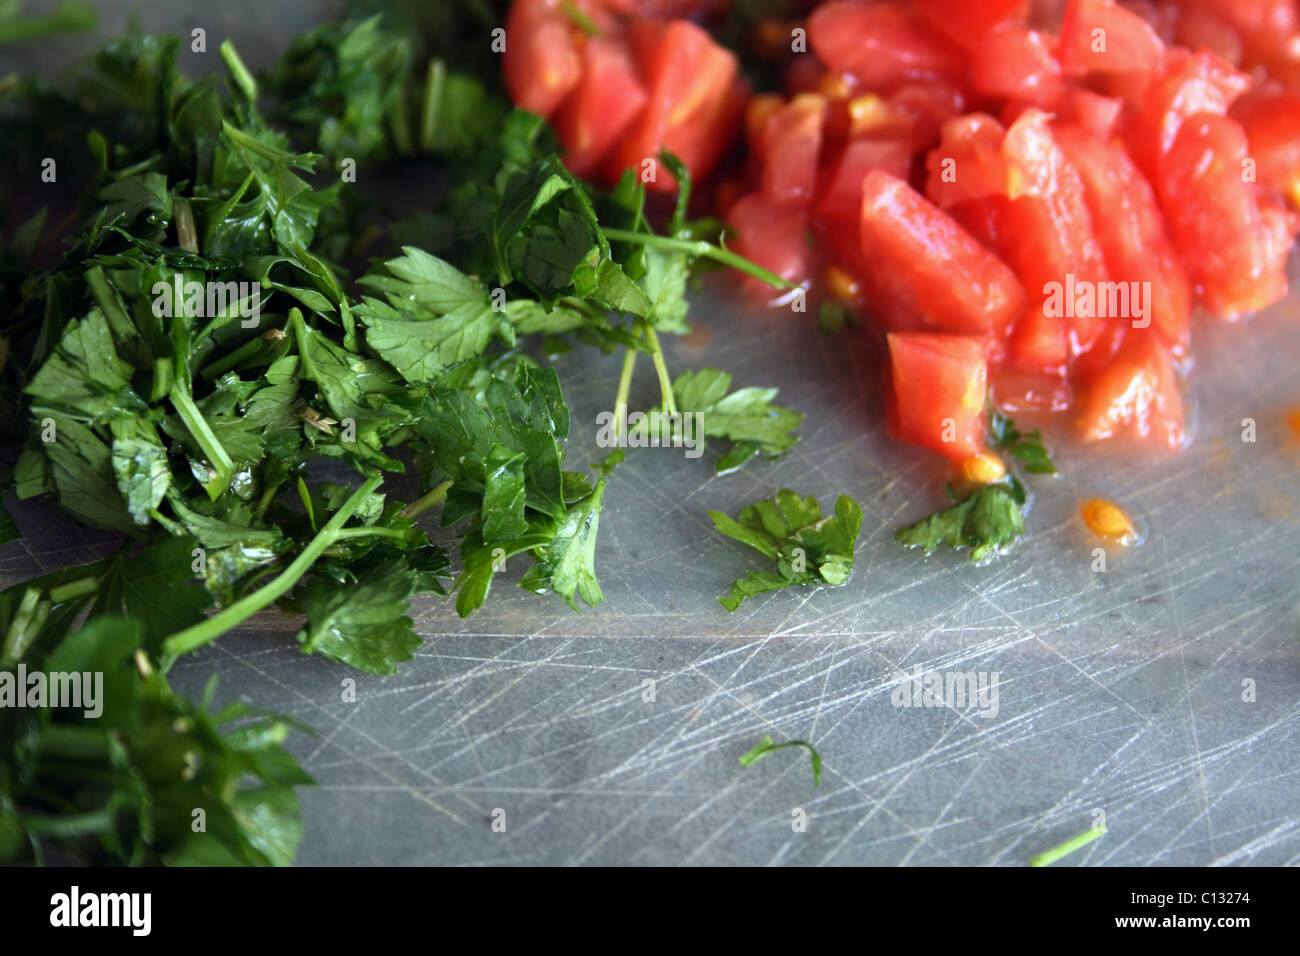 cutting parsley and tomato Stock Photo